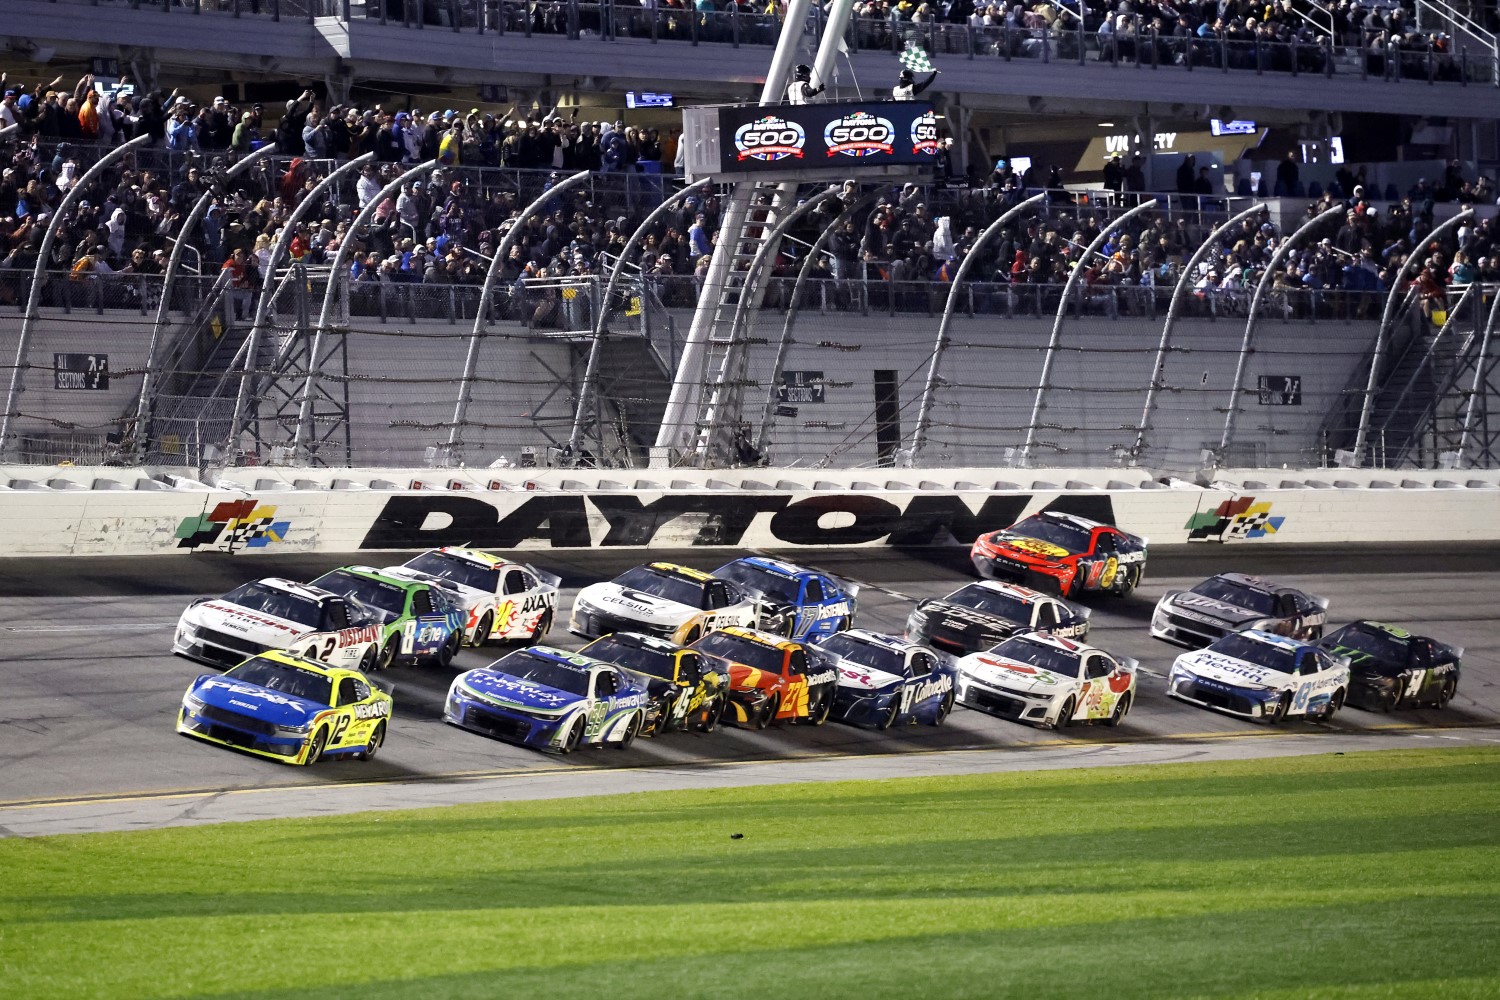 Ryan Blaney, driver of the #12 Menards/PEAK Ford, leads the field during the NASCAR Cup Series Daytona 500 at Daytona International Speedway on February 19, 2024 in Daytona Beach, Florida. (Photo by Chris Graythen/Getty Images)